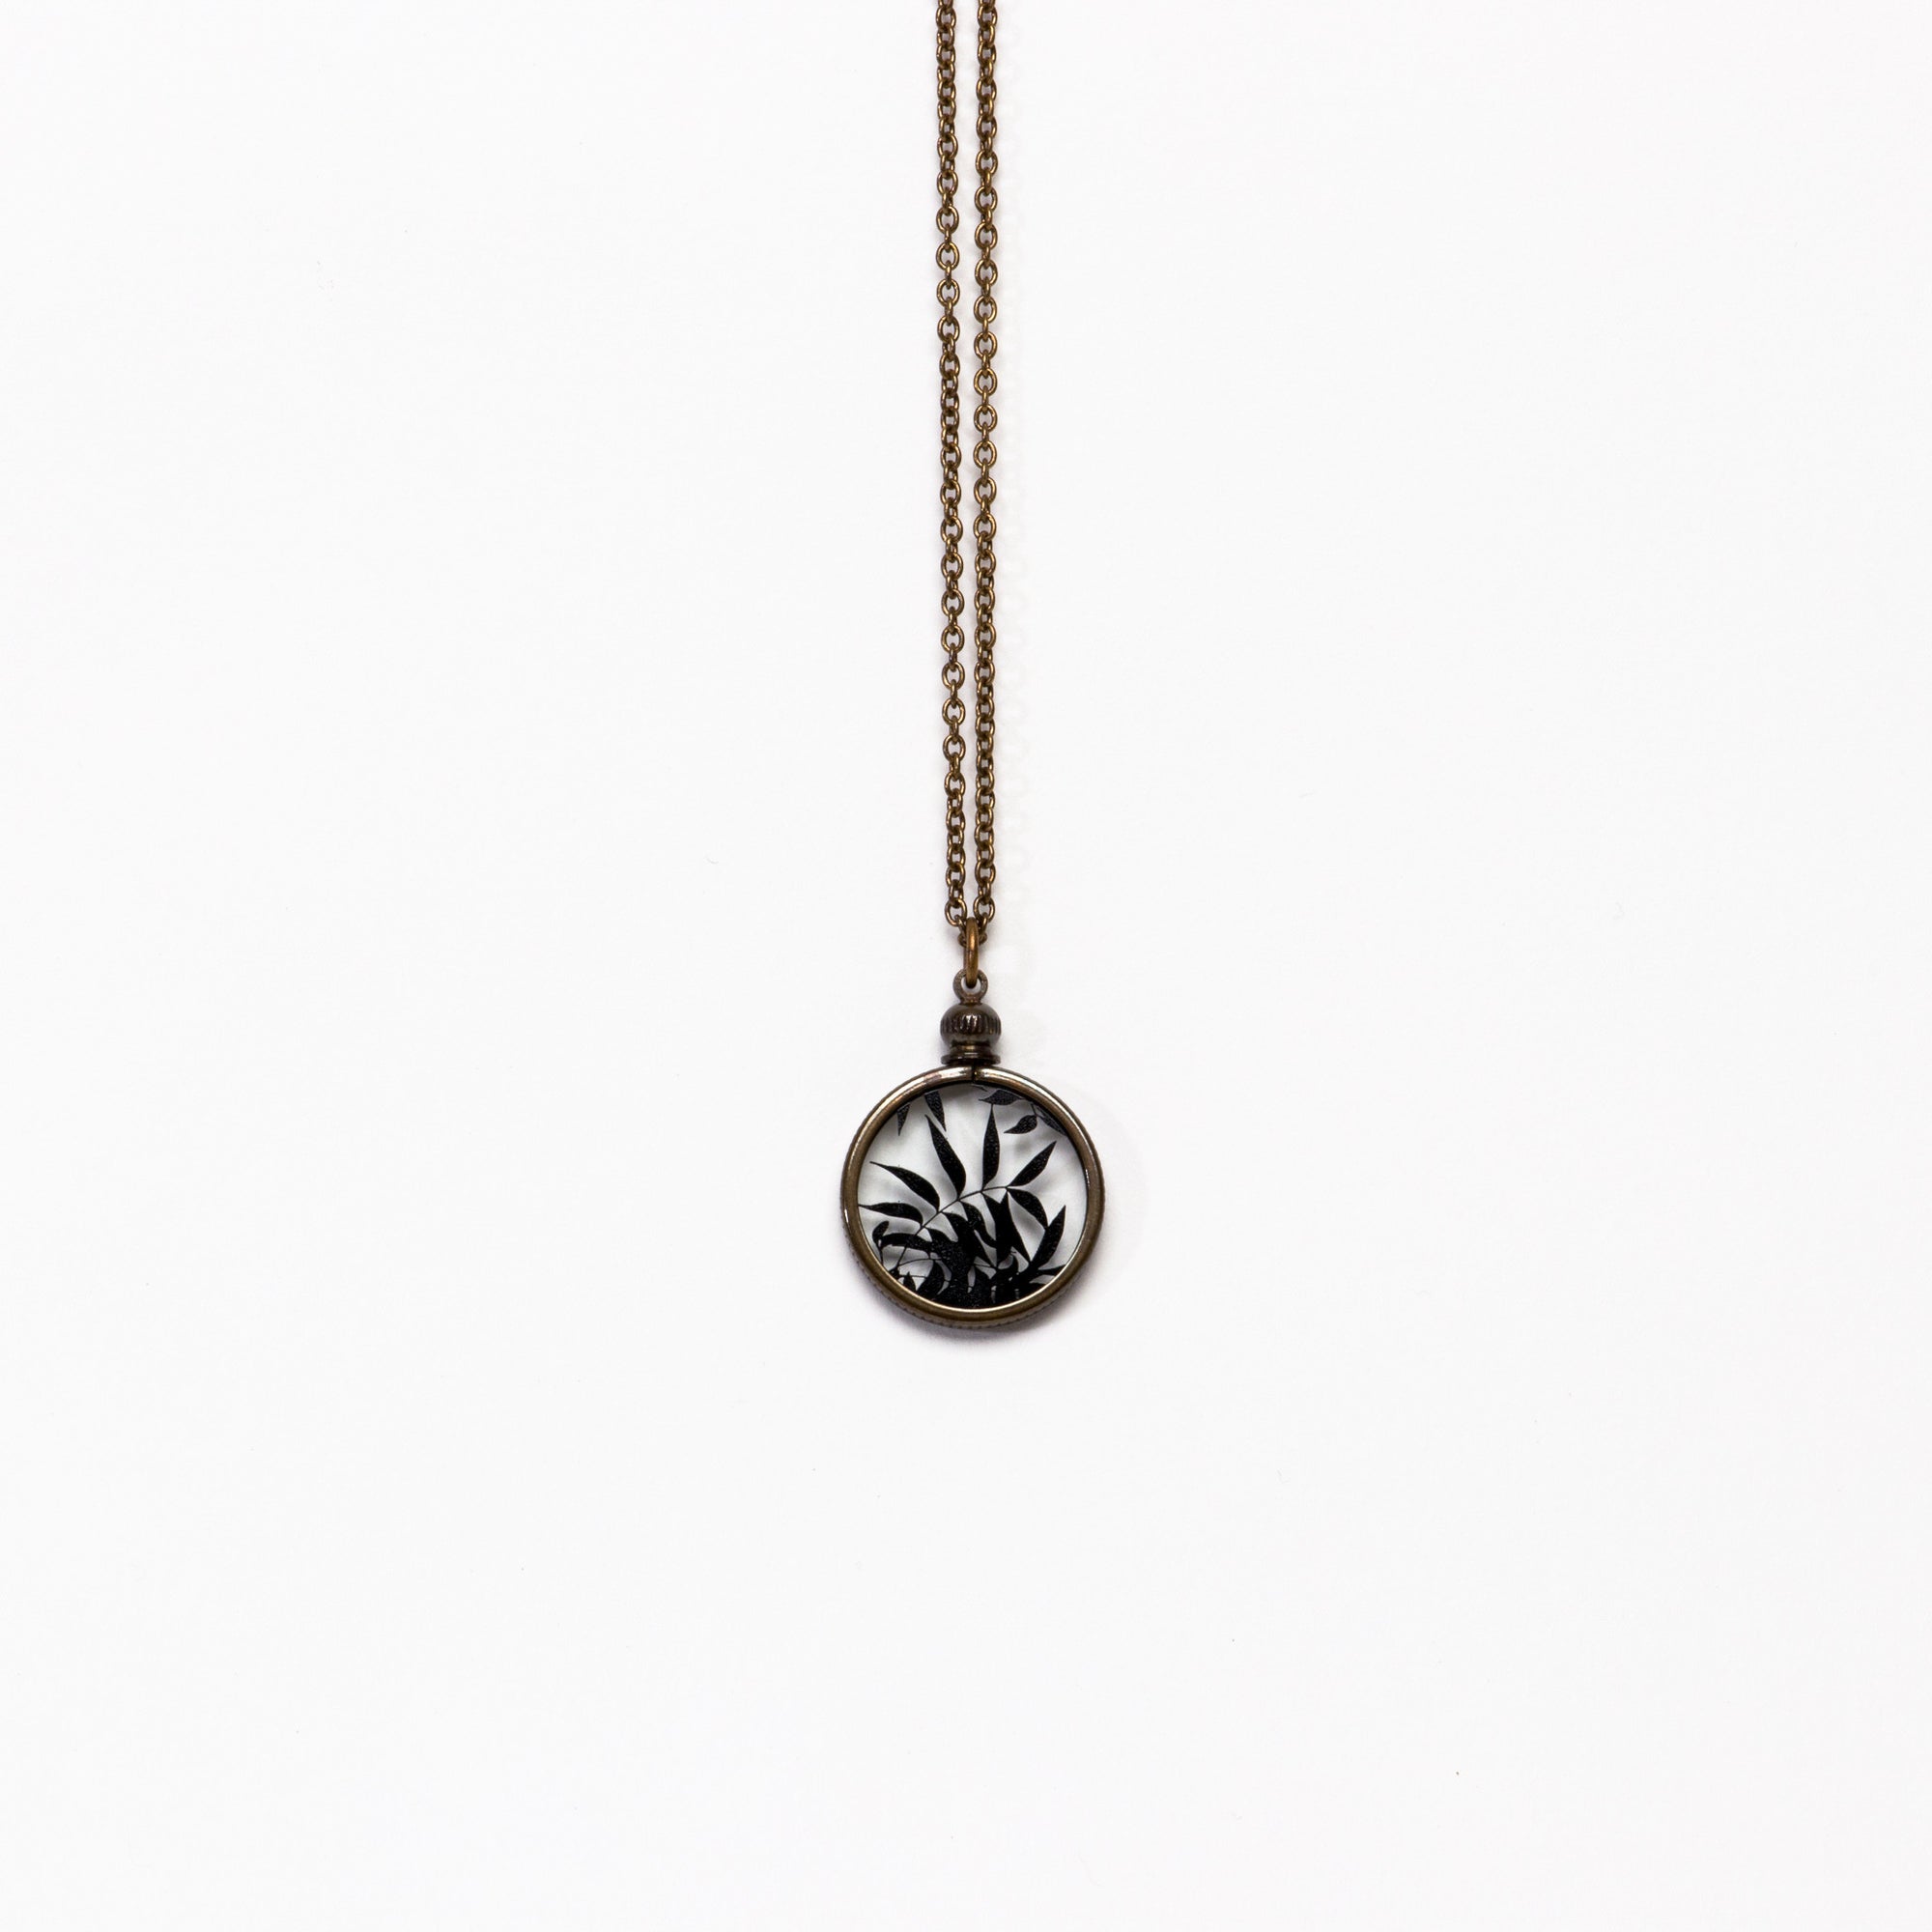 Ornamental Things - Barton Springs Trees Silhouette Necklace